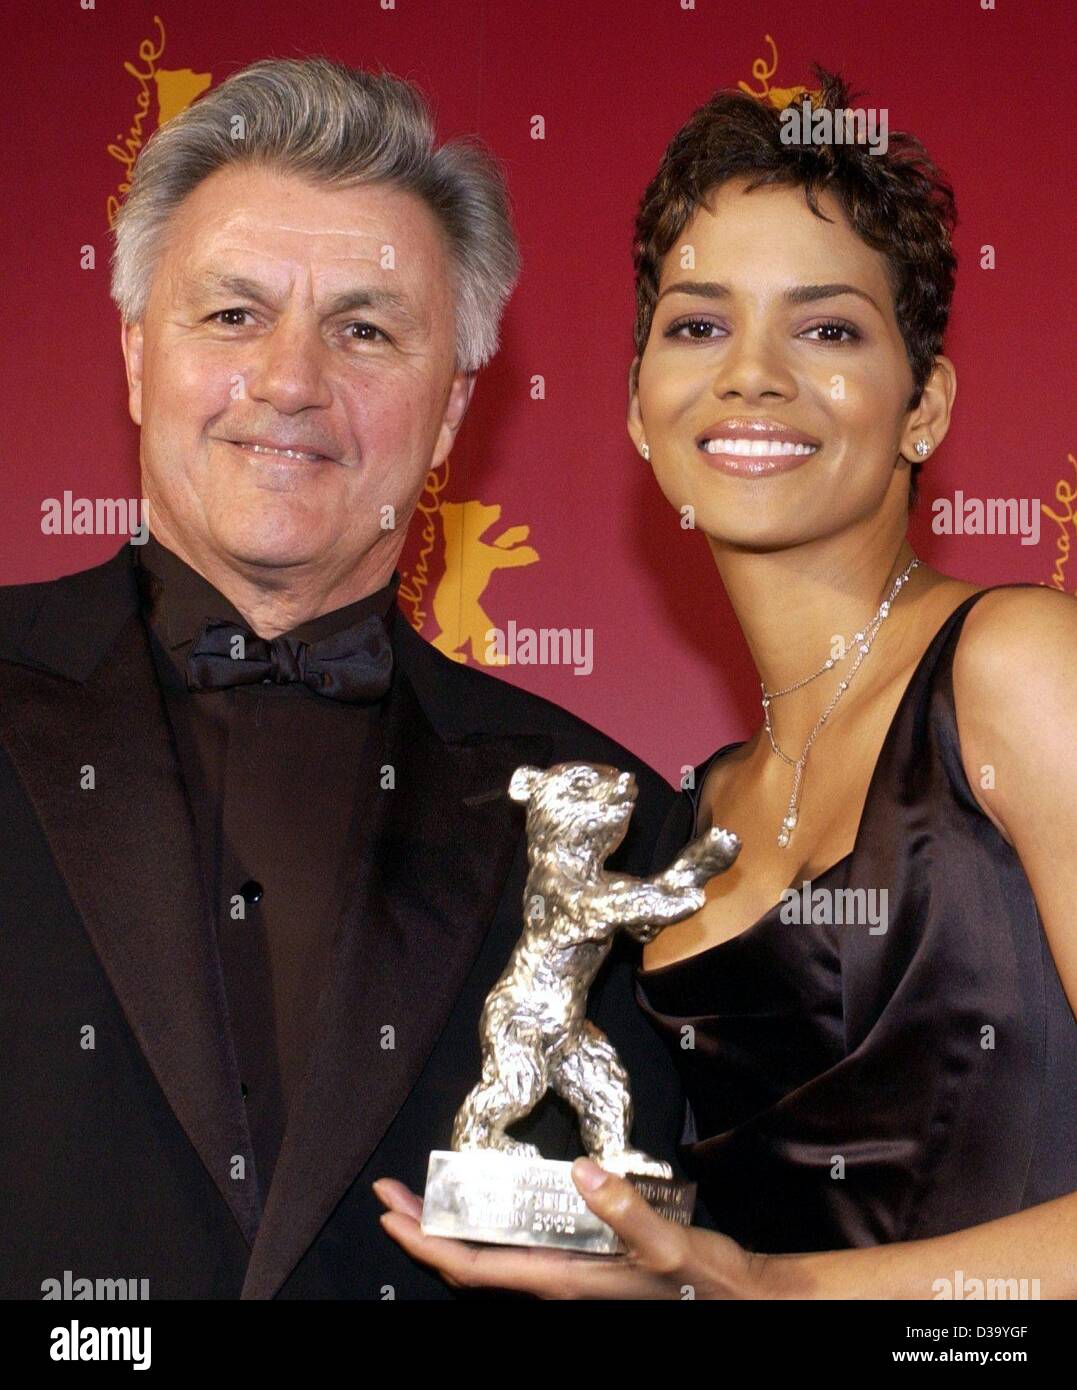 (dpa) - Berlinale: US novelist John Irving poses with Hollywood actress Hall Berry after handing the Silver Bear as 'Best actress' to her, 17.2.2002. Berry received the actors' award of the Berlin Film Festival for her leading role in 'Monster's Ball'. The award ceremony closed the 52. International Stock Photo